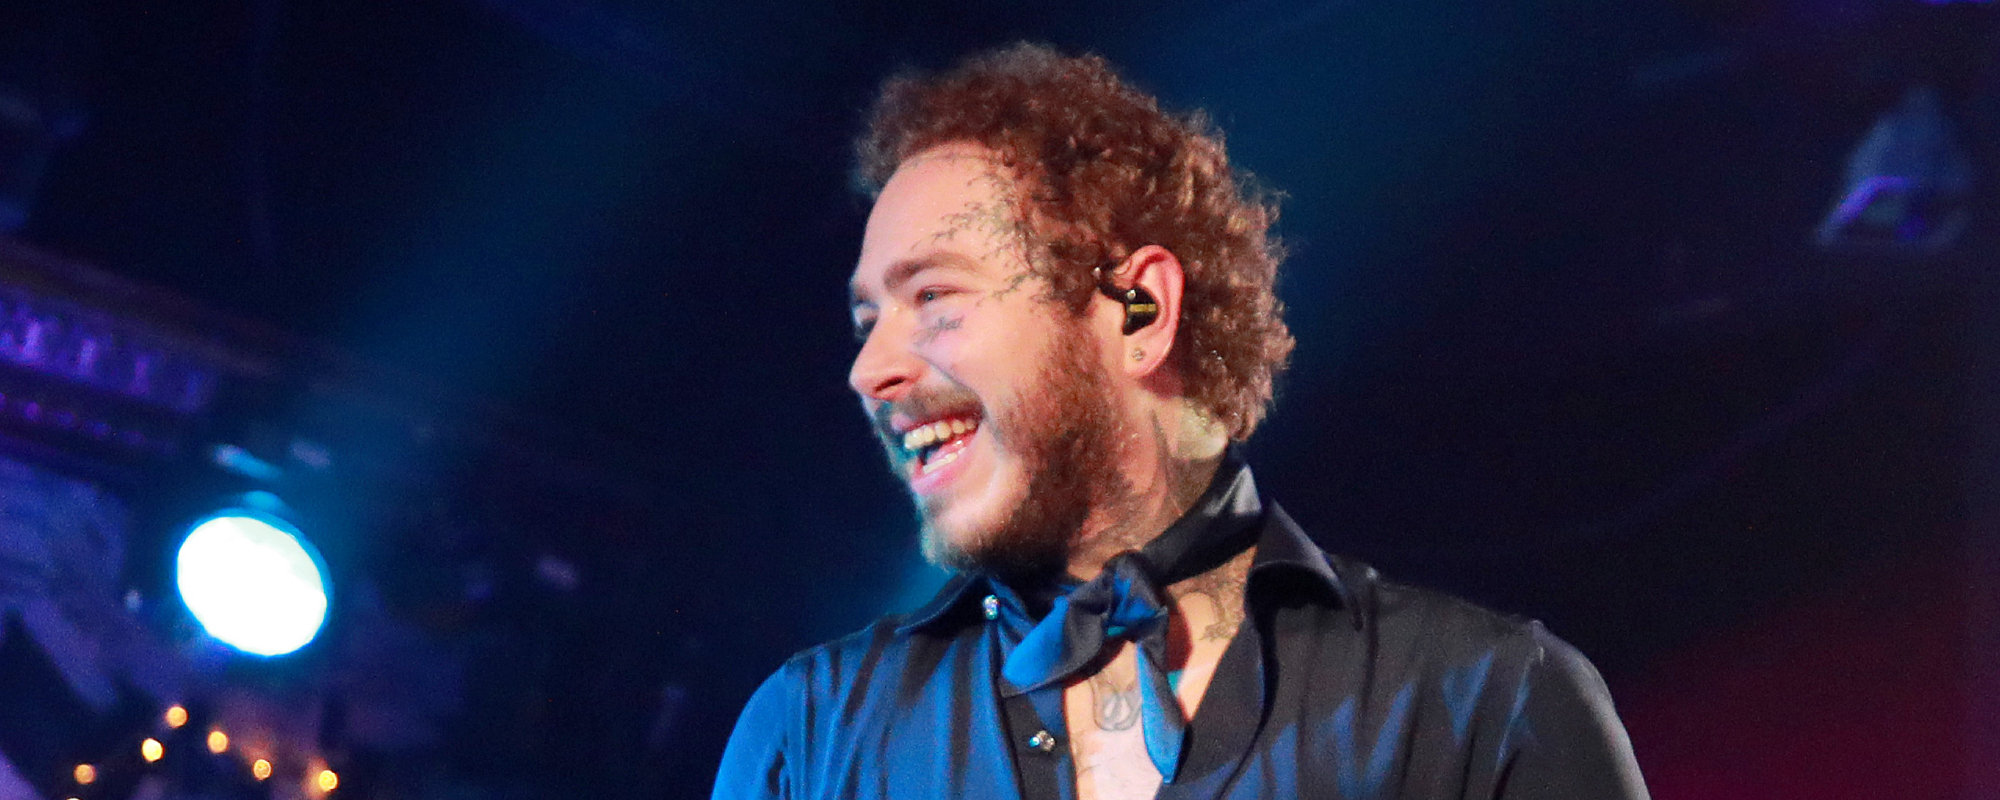 Fans Unearth Years Old Post Malone Tweet as His New Country Single Takes the Internet by Storm